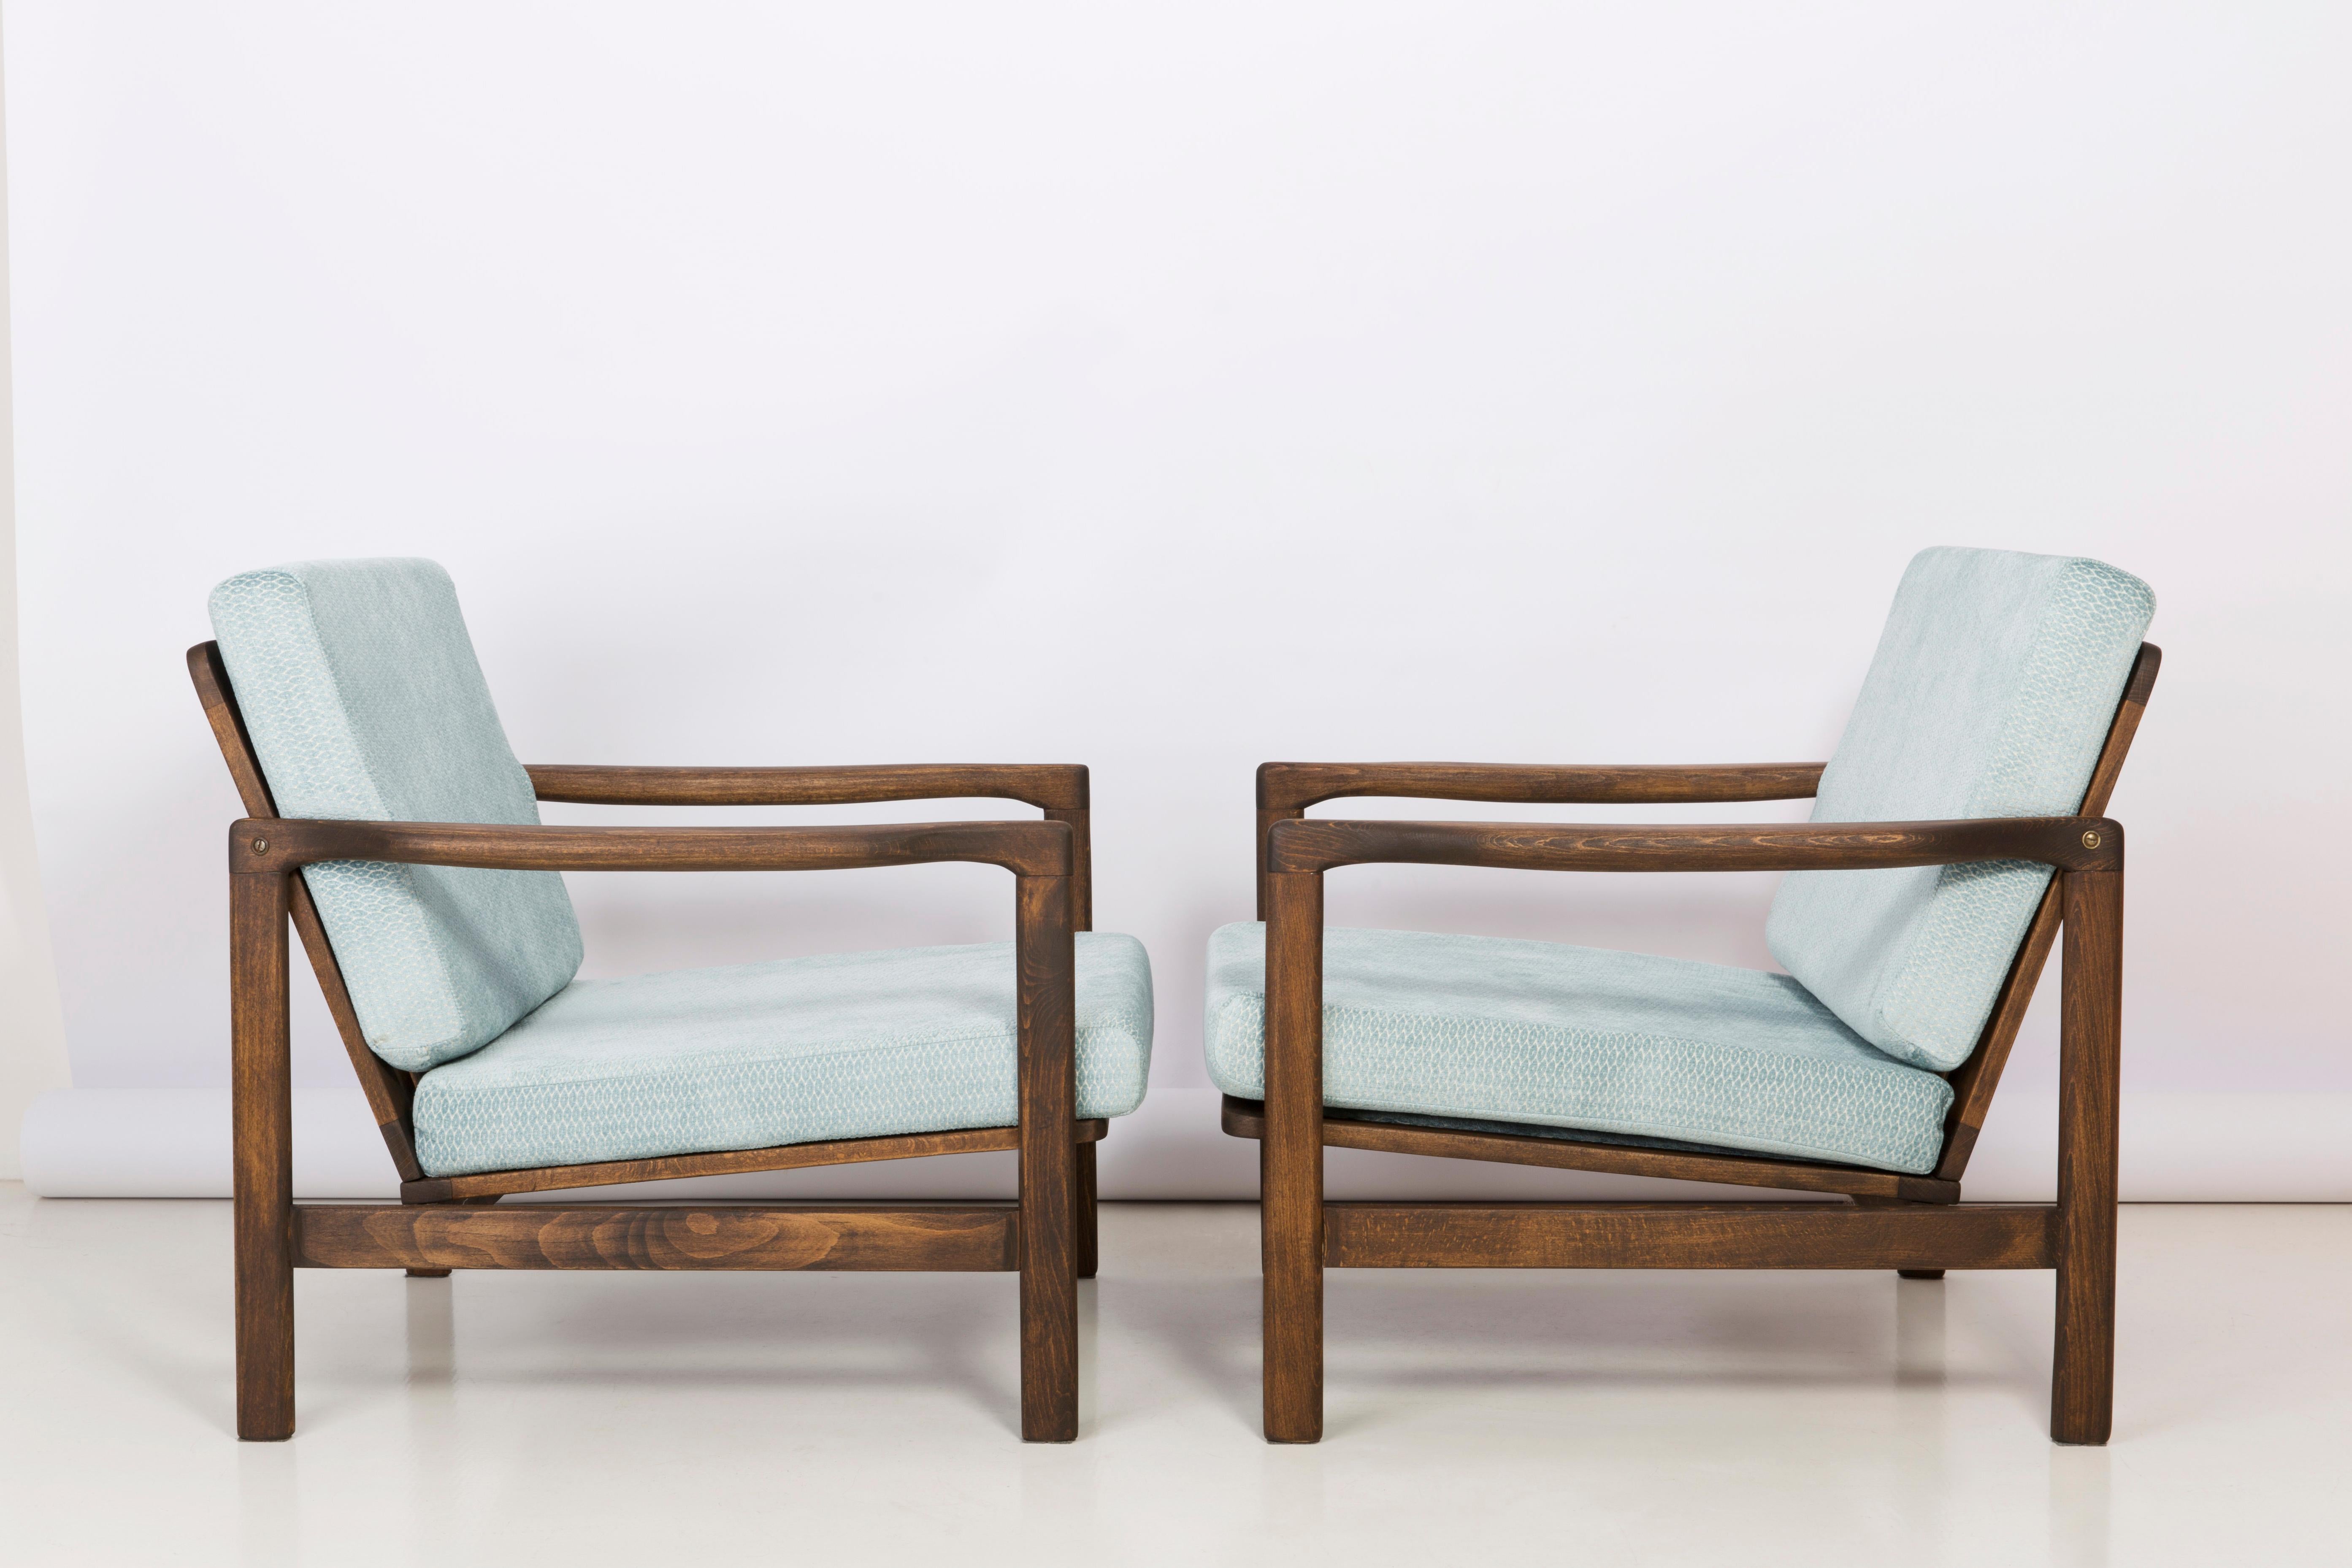 Hand-Crafted Set of Two Midcentury Baby Blue Pattern Velvet Armchairs, Zenon Baczyk, 1960s For Sale